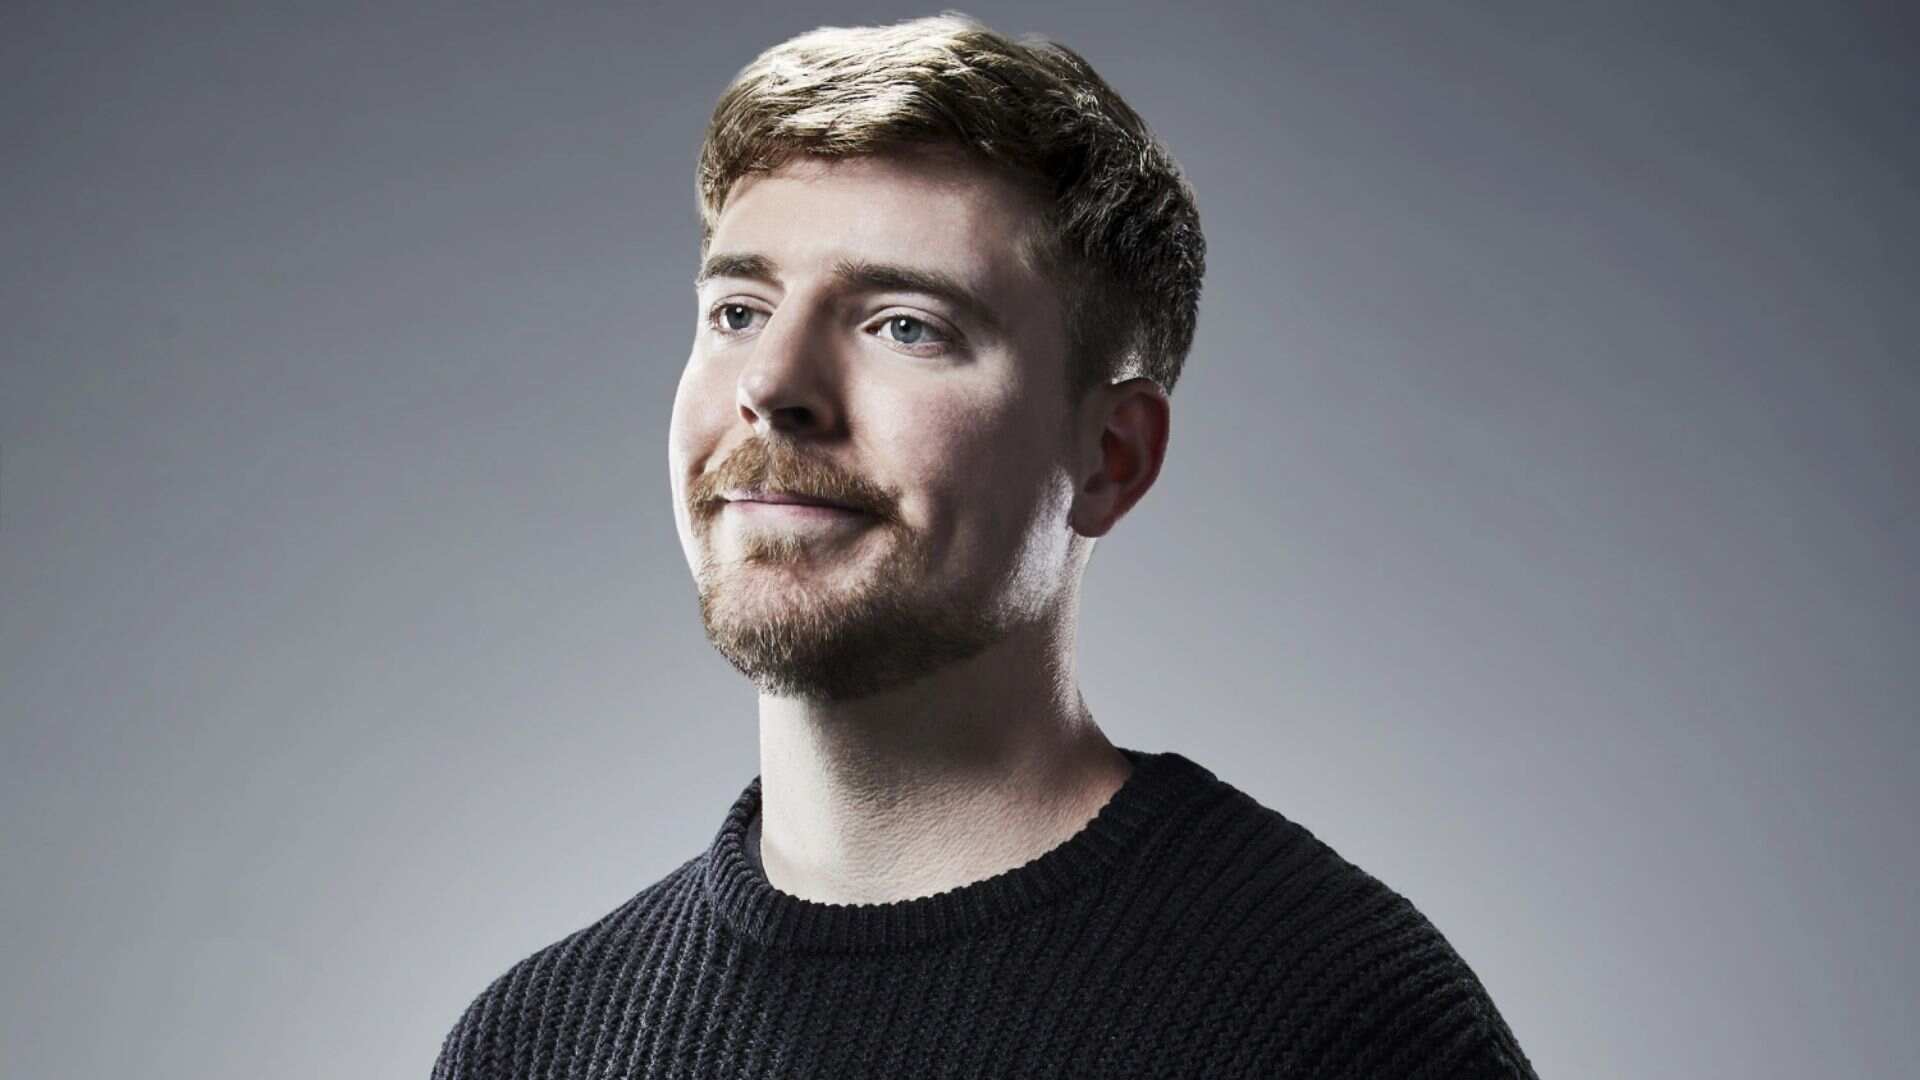 MrBeast Surpasses T-Series To Become YouTube’s Most-Subscribed Channel